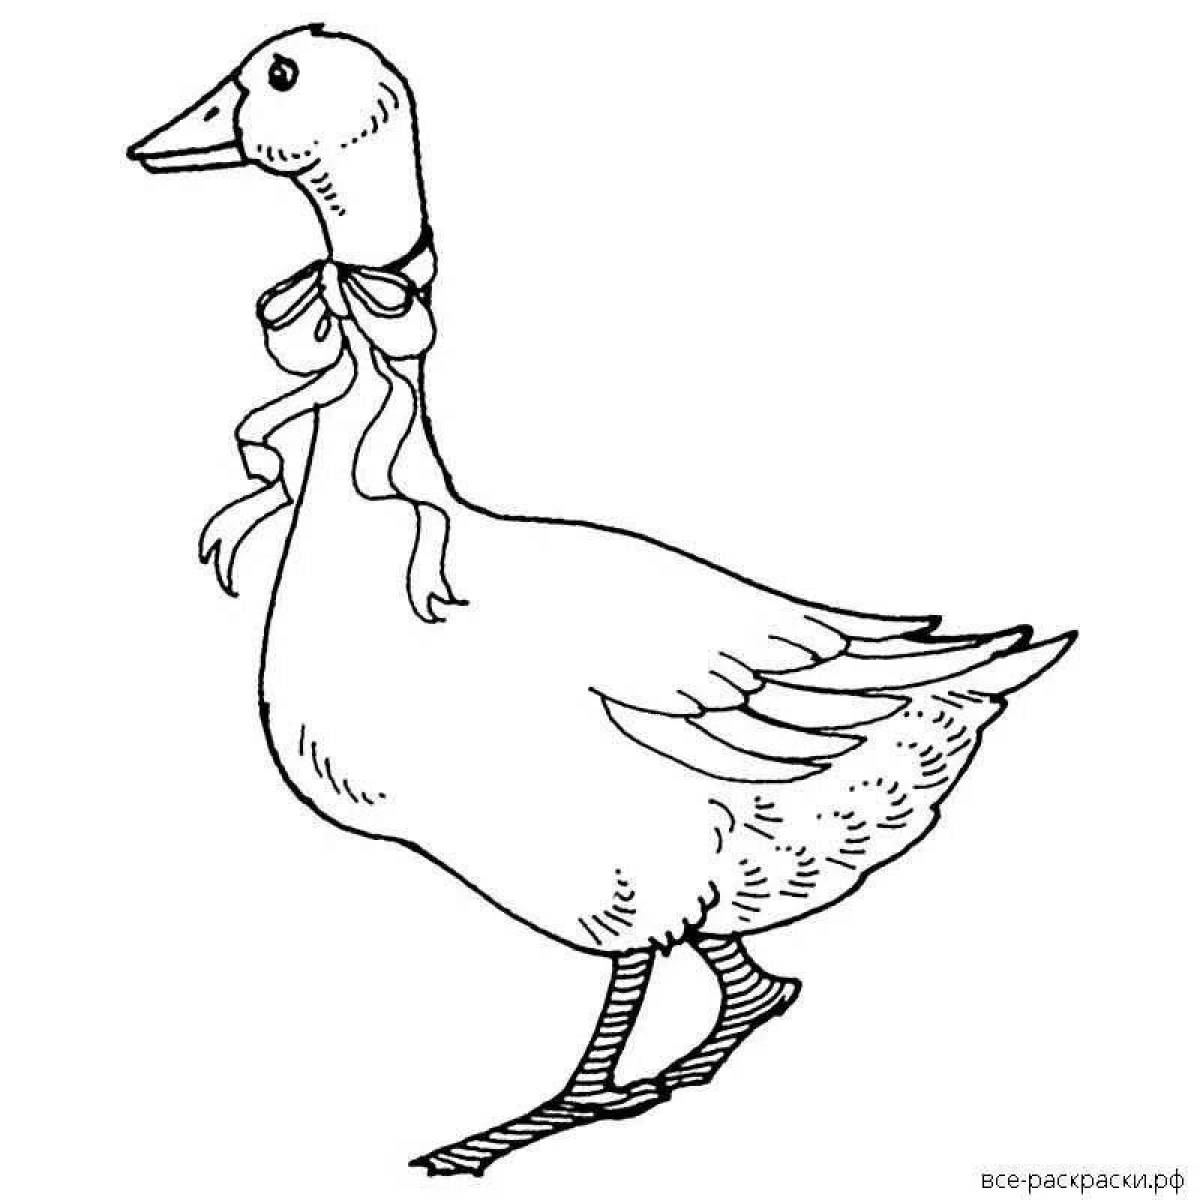 Glitter goose hug coloring page